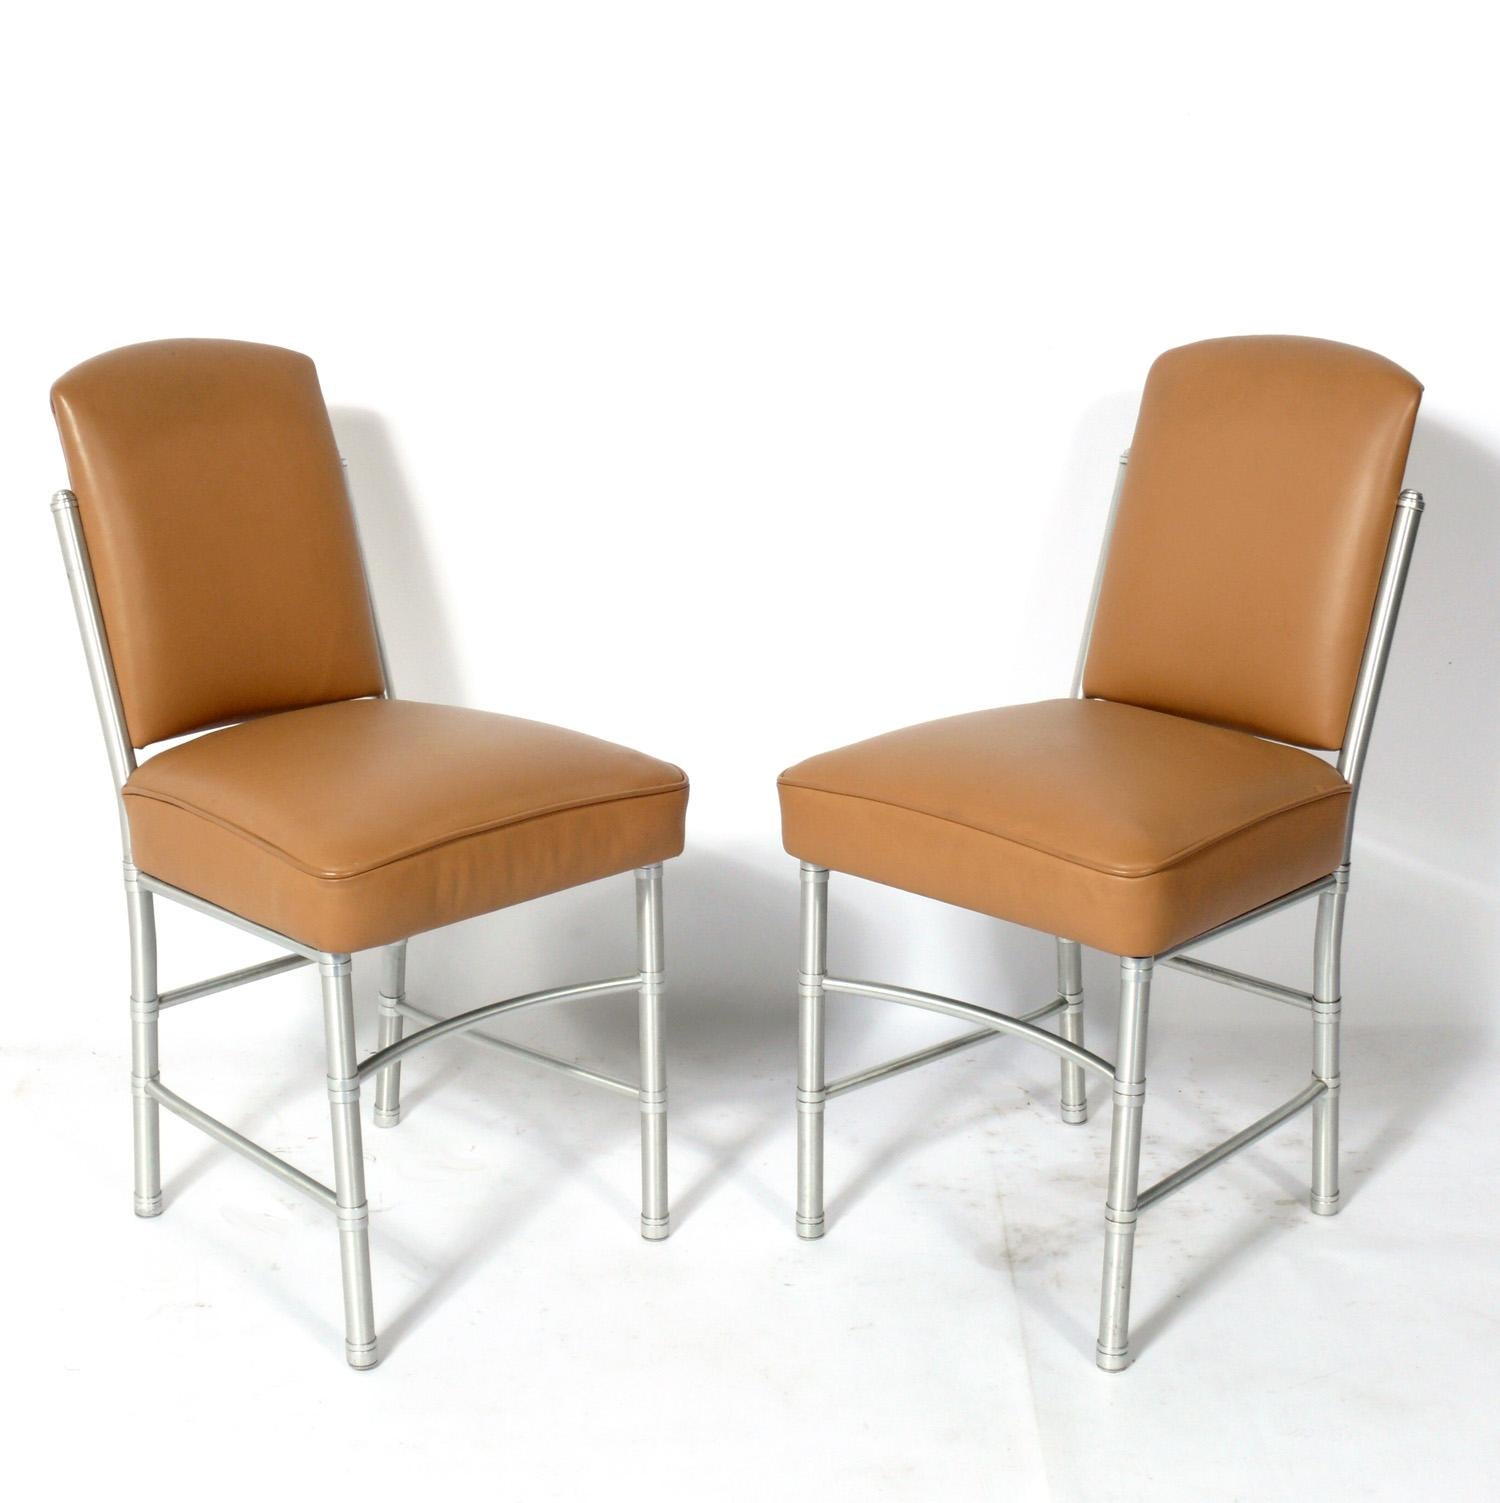 North American Warren McArthur Dining Chairs